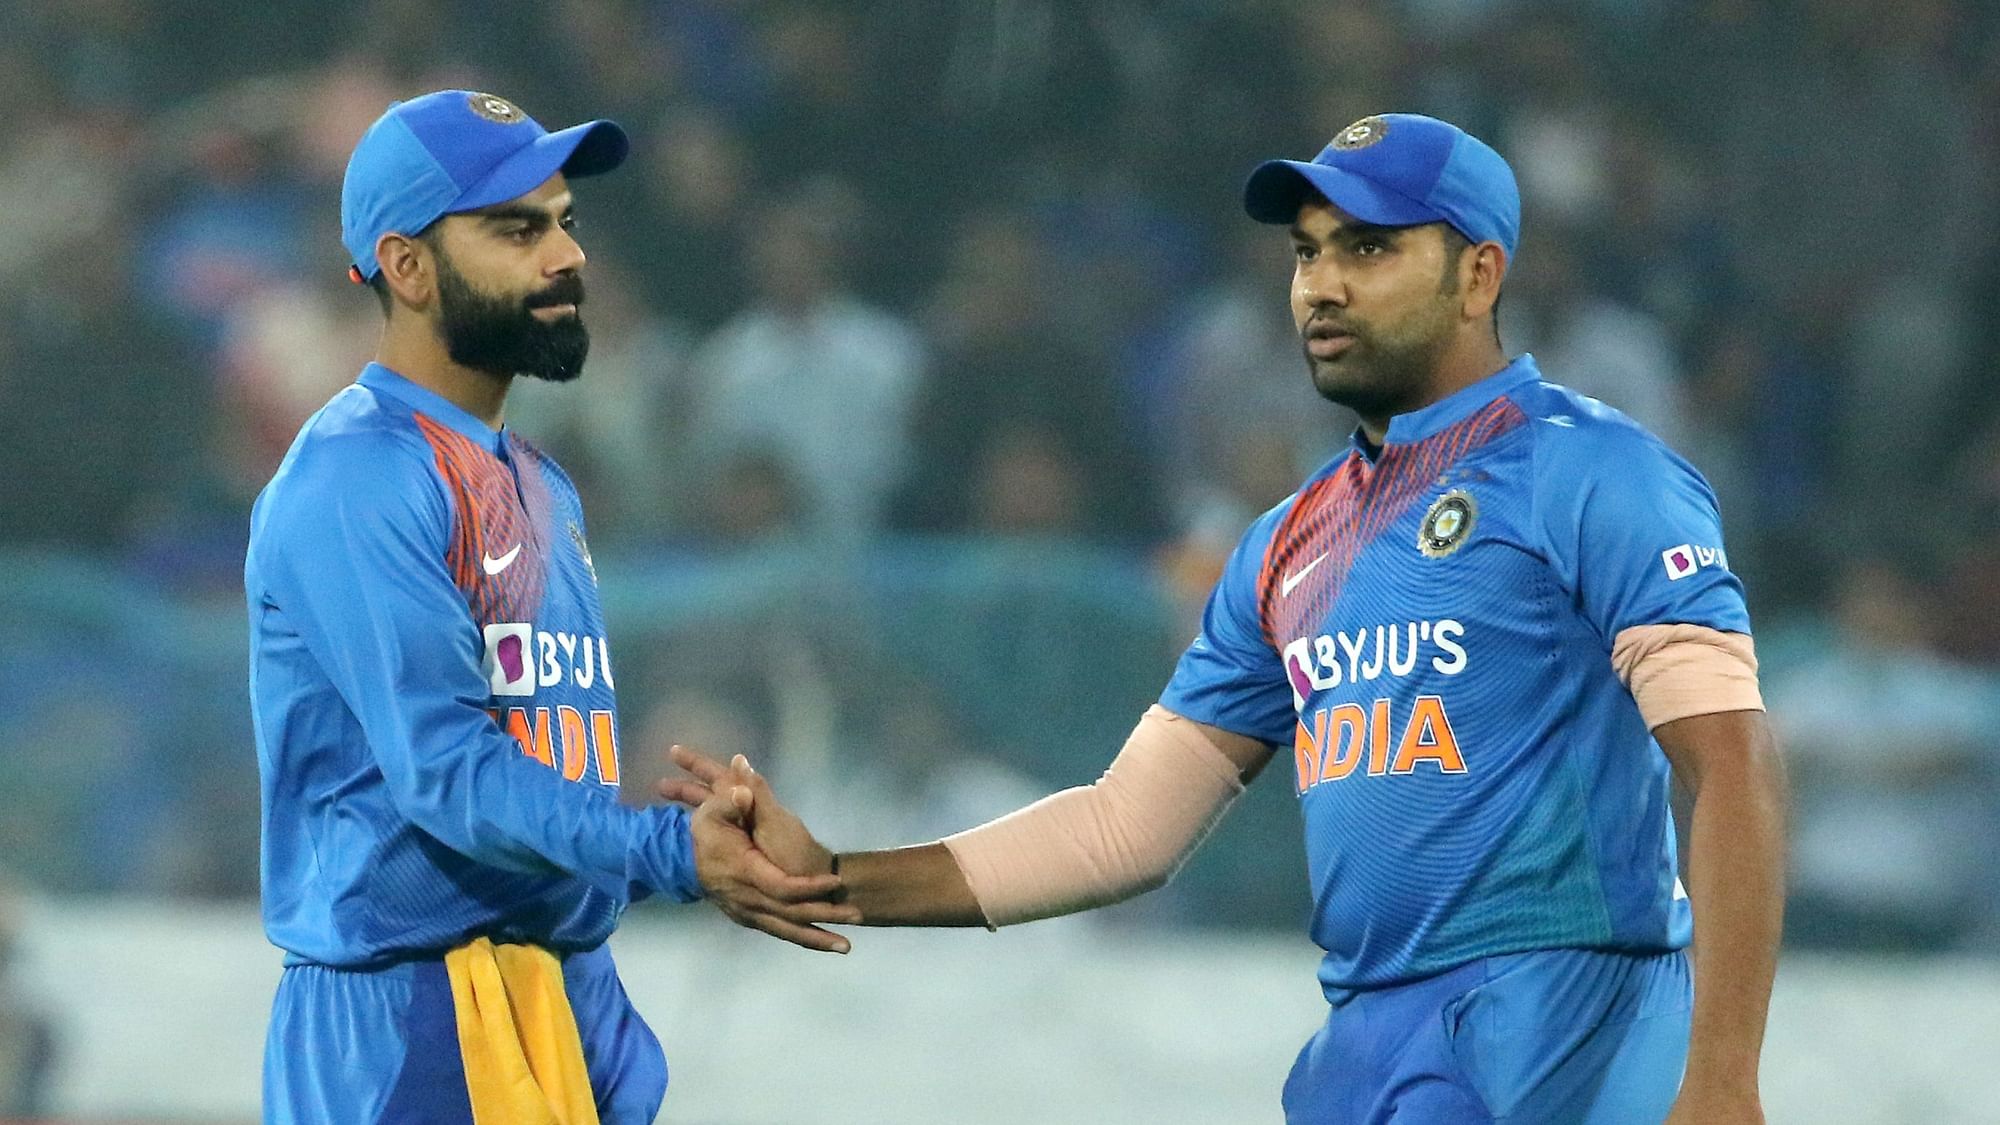 Virat Kohli and Rohit Sharma will end 2019 as number one and two in the ICC ODI rankings.